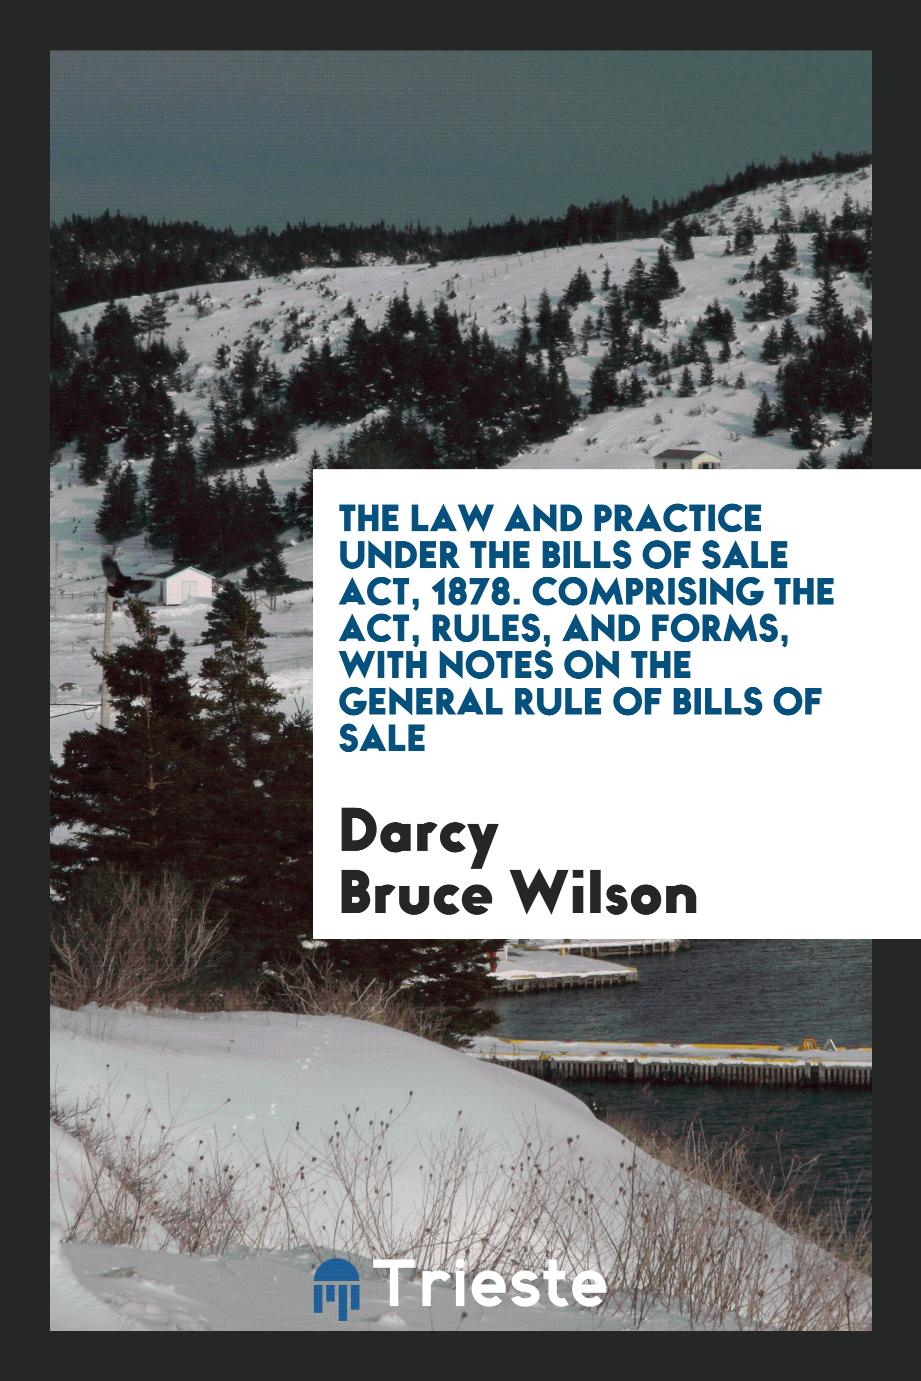 The Law and Practice under the Bills of Sale Act, 1878. Comprising the Act, Rules, and Forms, with Notes on the General Rule of Bills of Sale